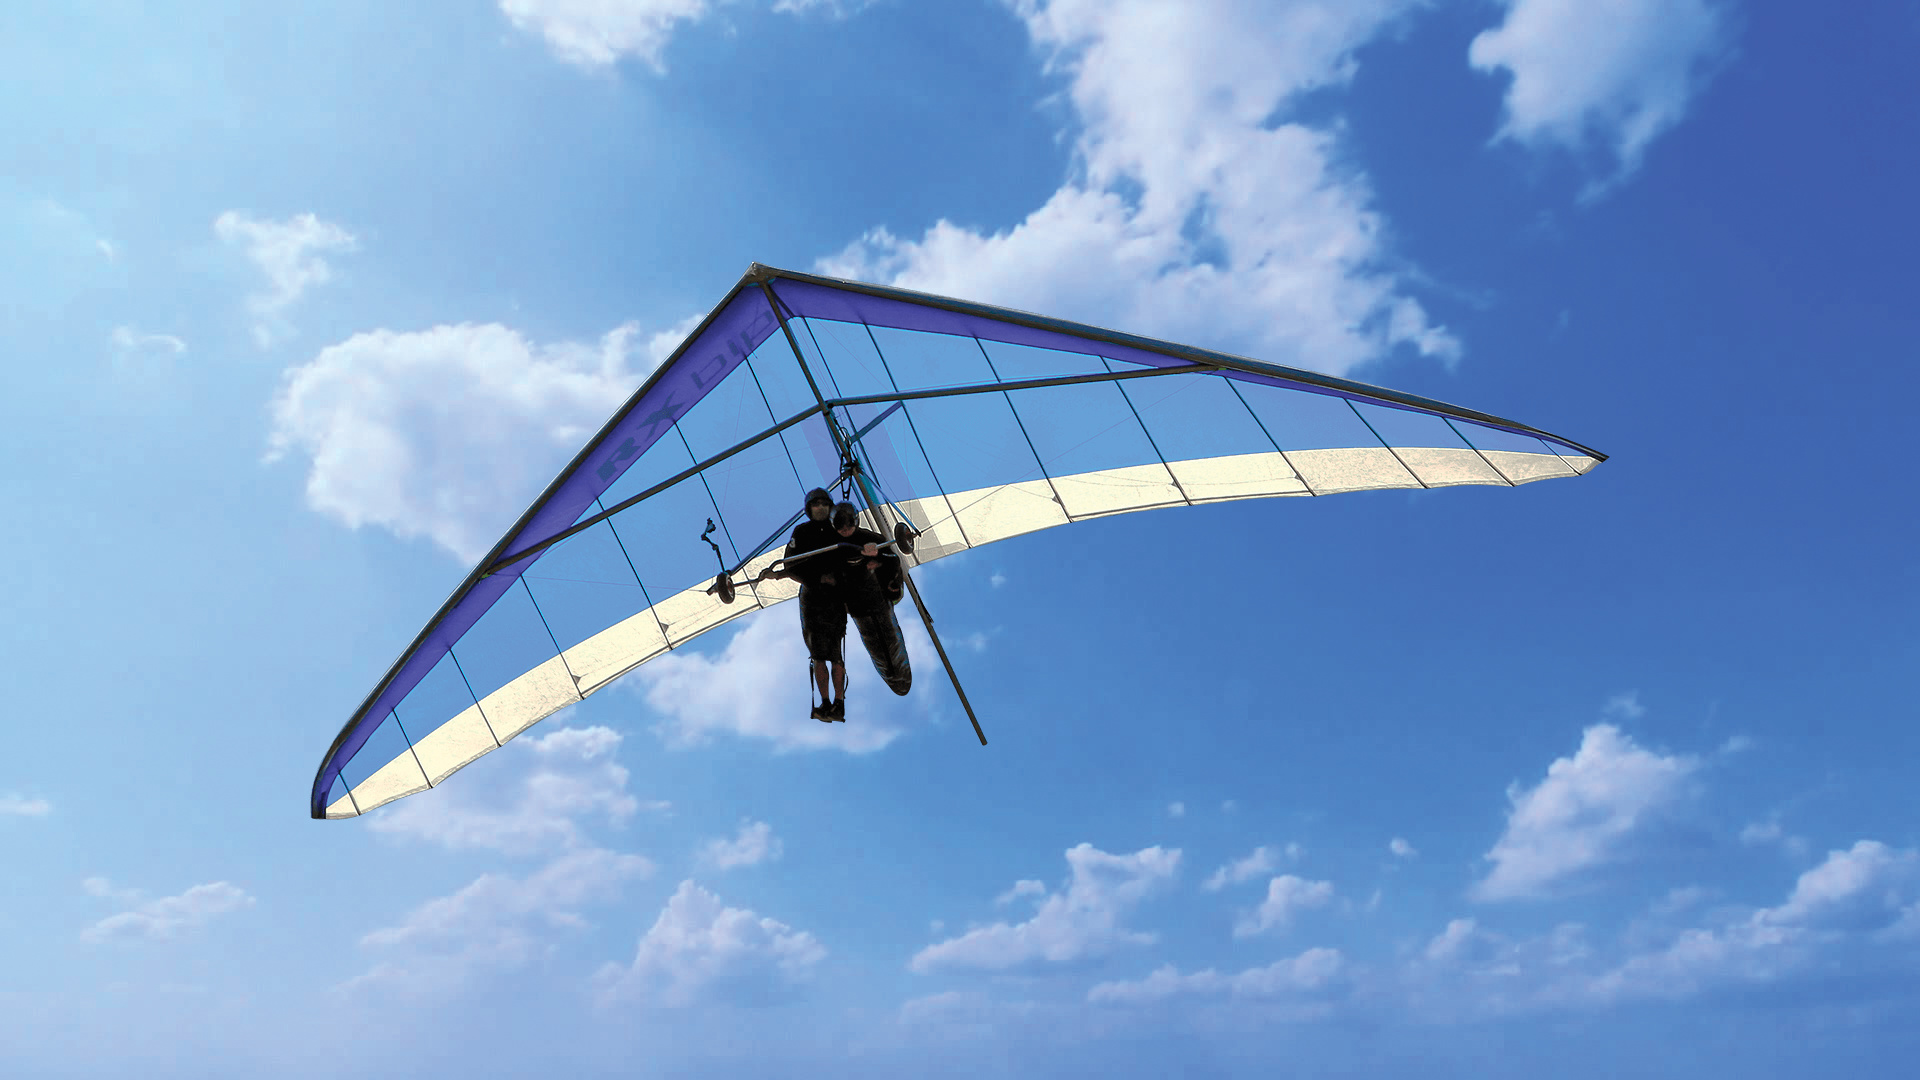 Hang Gliding: An extended flight, Flying long distances, Tandem, Soaring pilots. 1920x1080 Full HD Background.